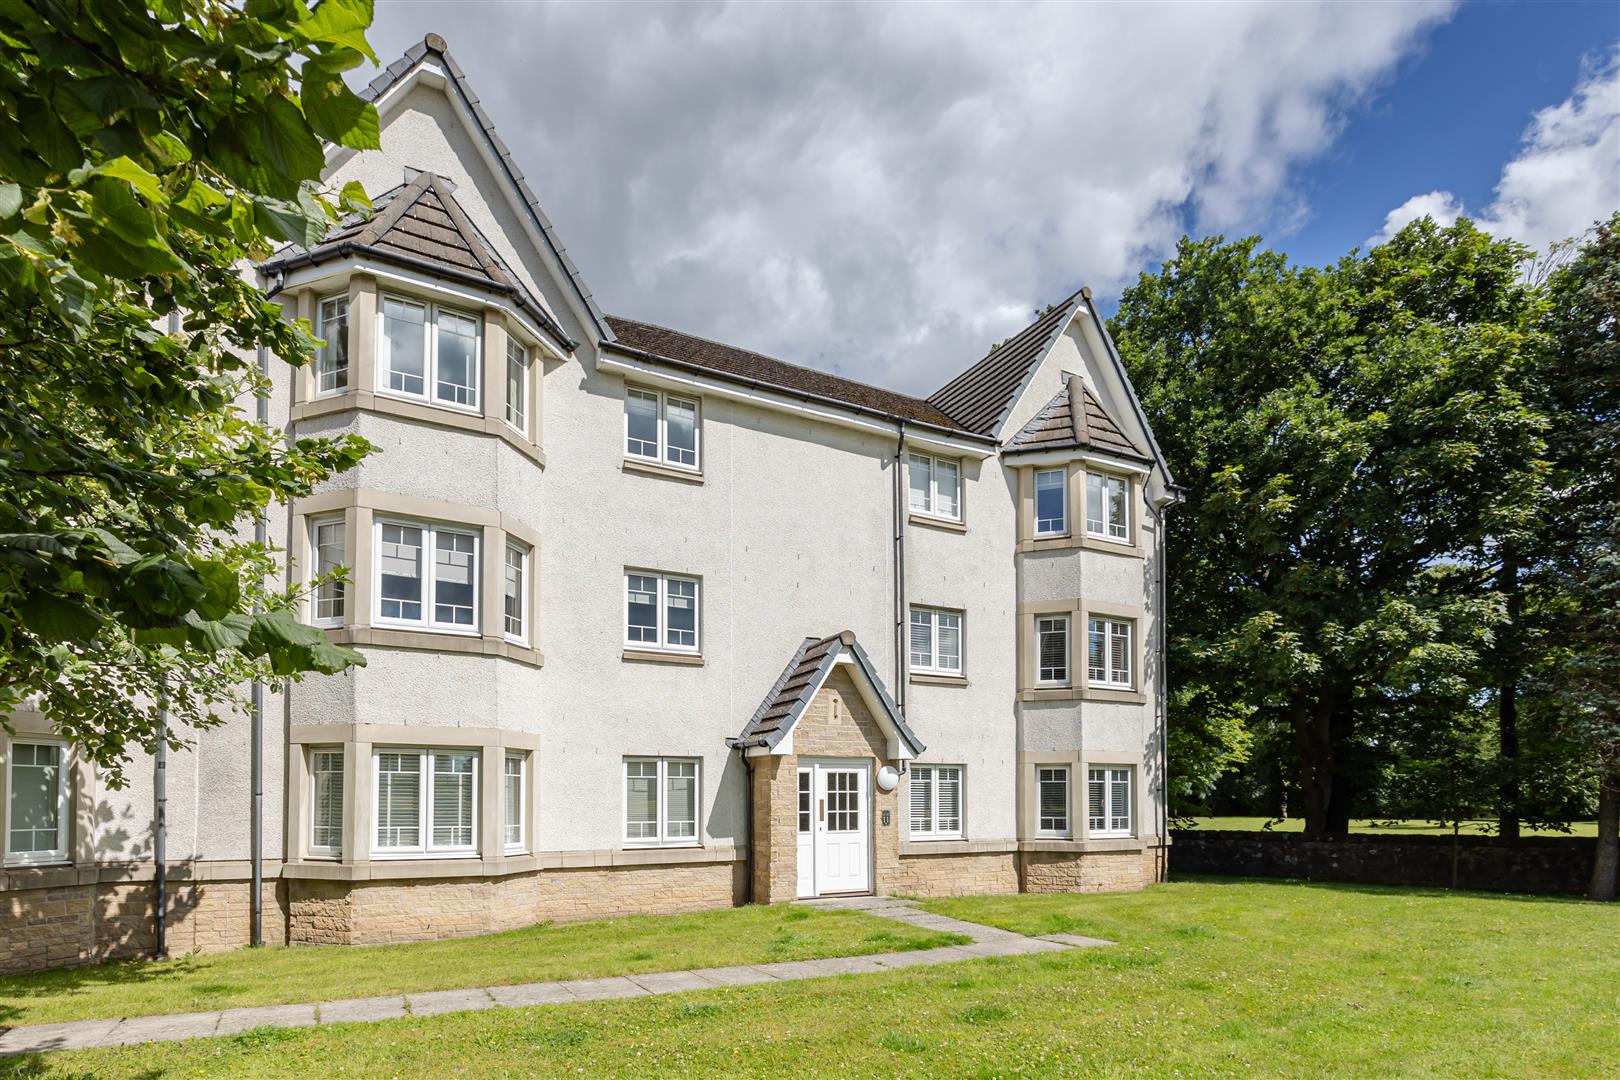 2 bed flat for sale in Mccormack Place, Larbert - Property Image 1